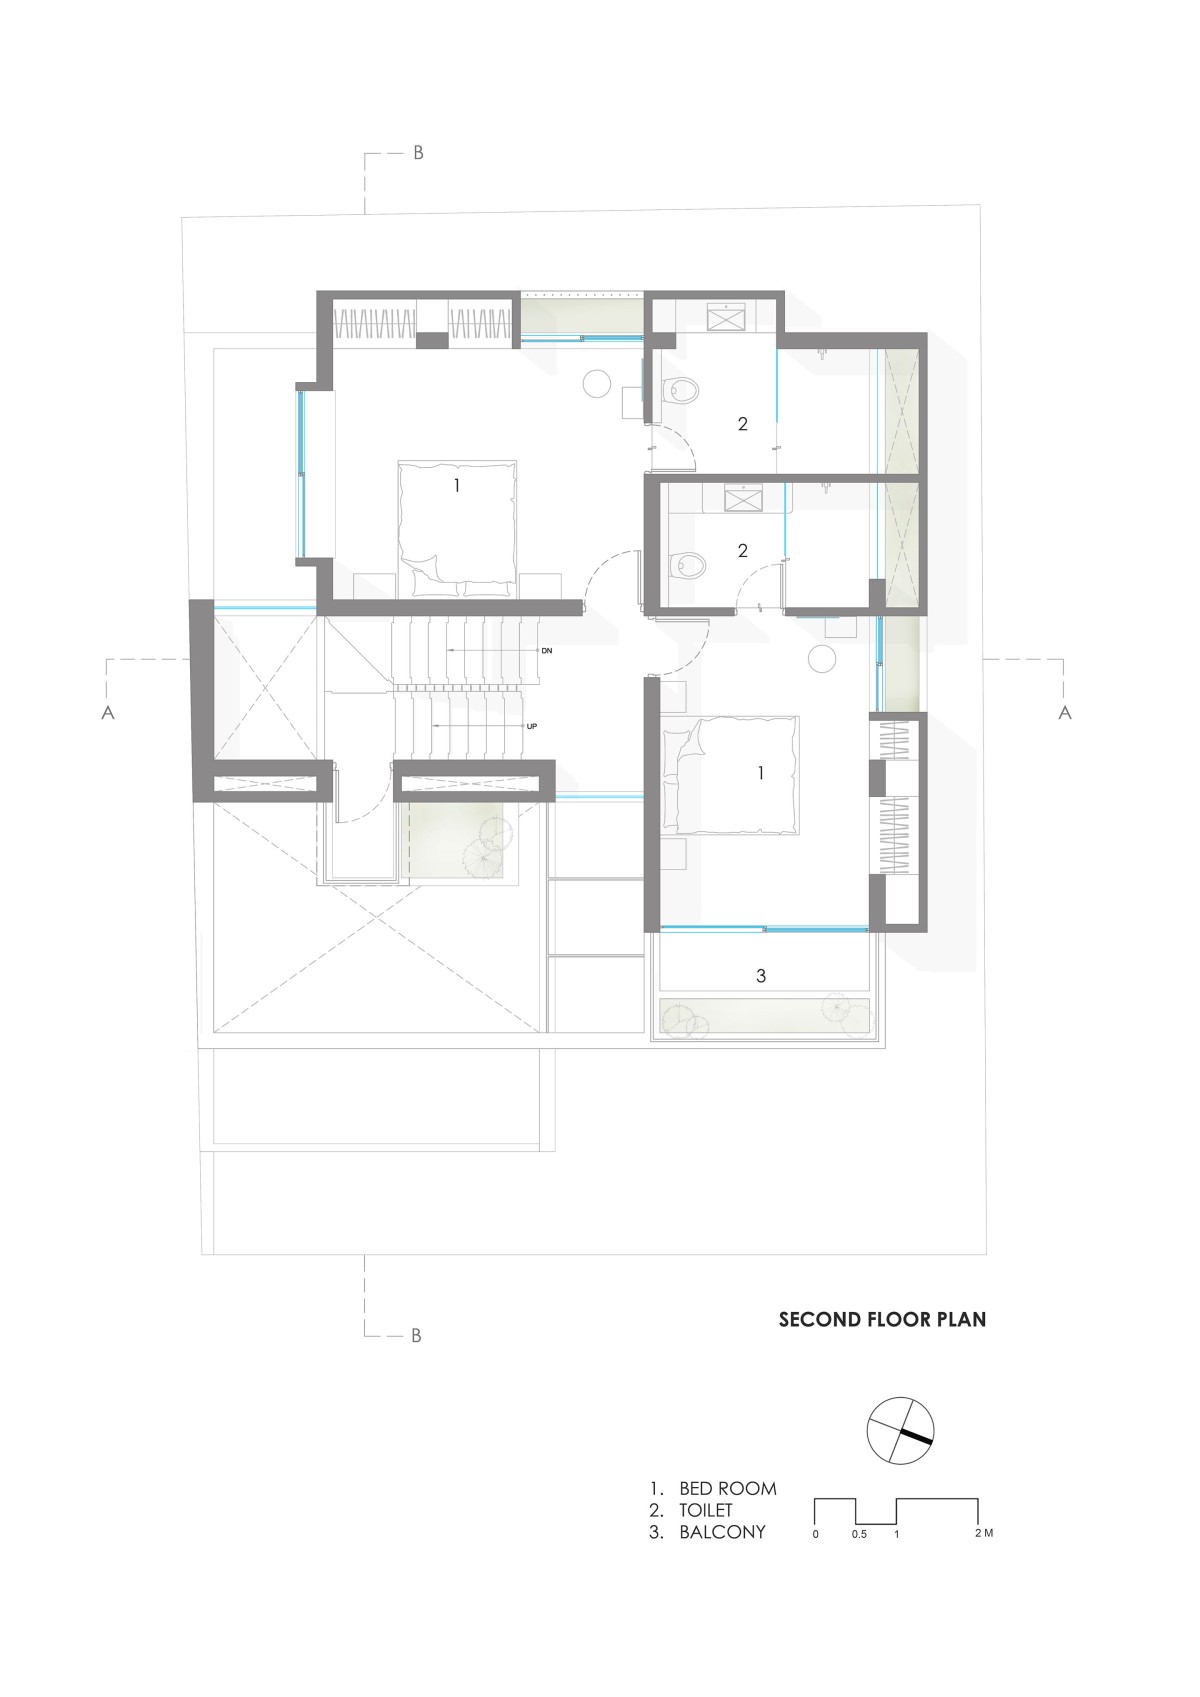 Second floor plan of The White Bleached House by Neogenesis+Studi0261